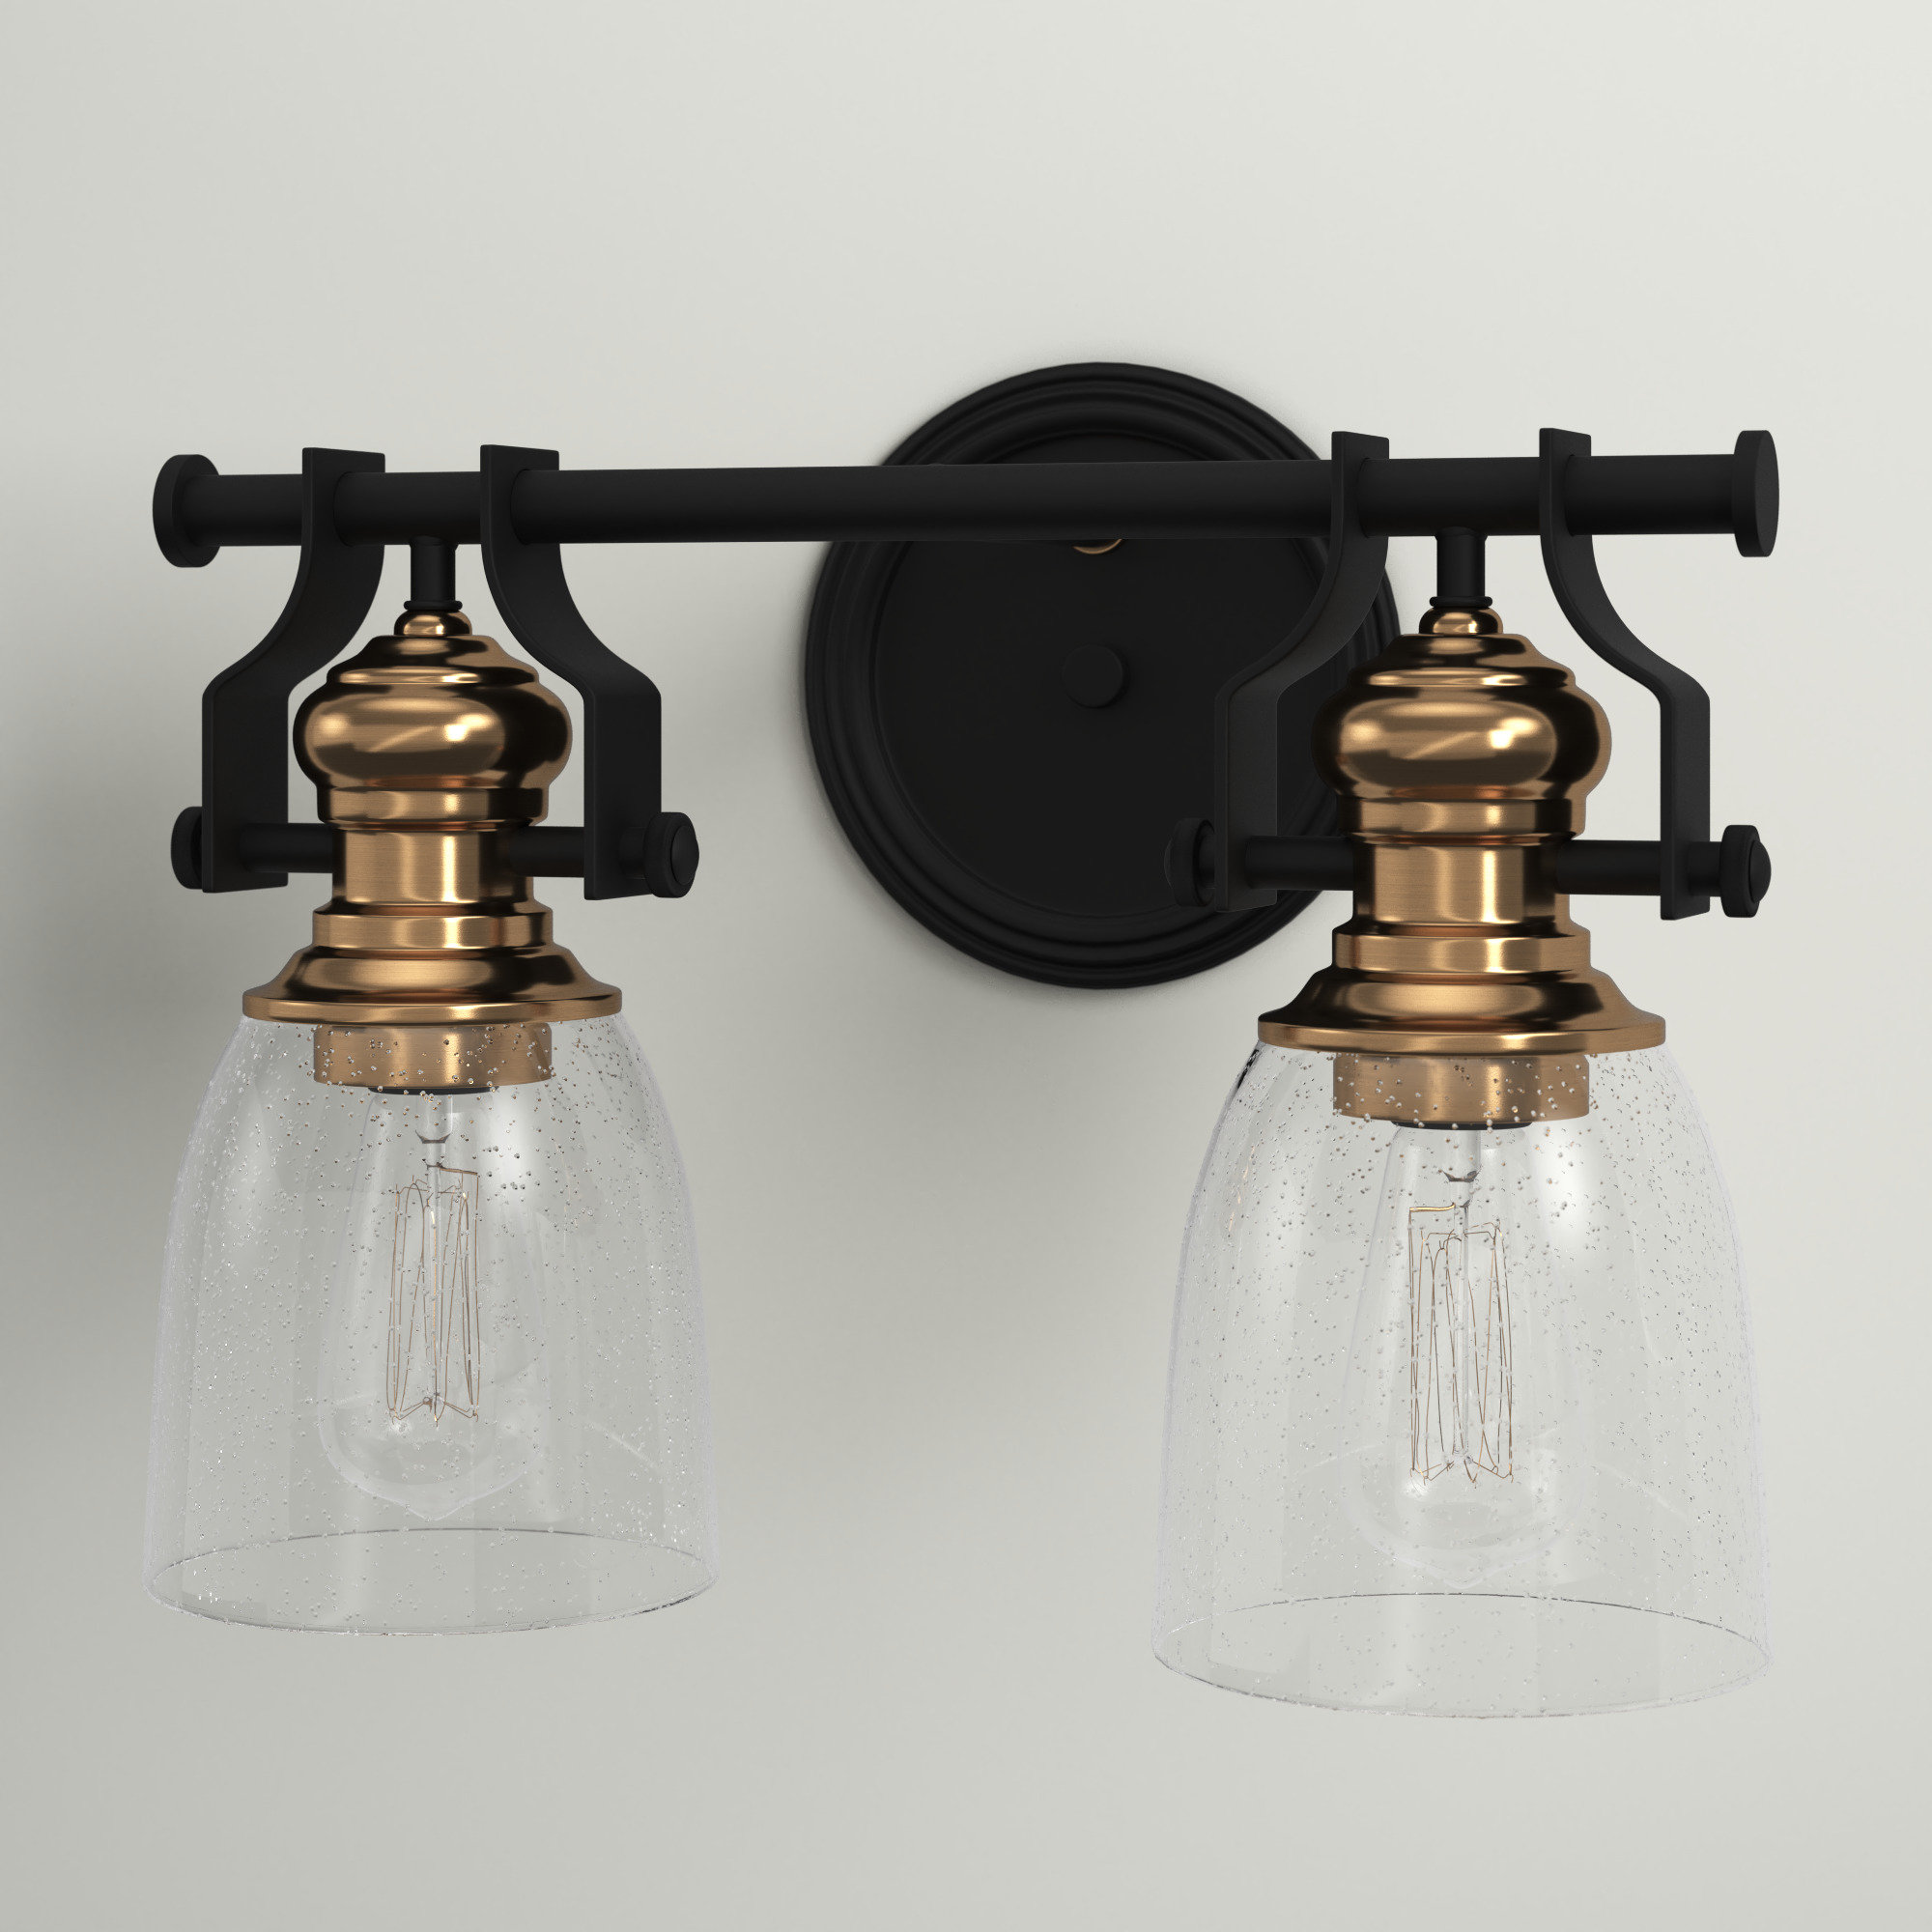 Vintage Style Globe Oil Rubbed Bronze Metal Shade HWH Industrial Wall Sconce Lighting Fixtures Over Mirror 5HTJ3-3W ORB 3-Light Bathroom Wall Vanity Light